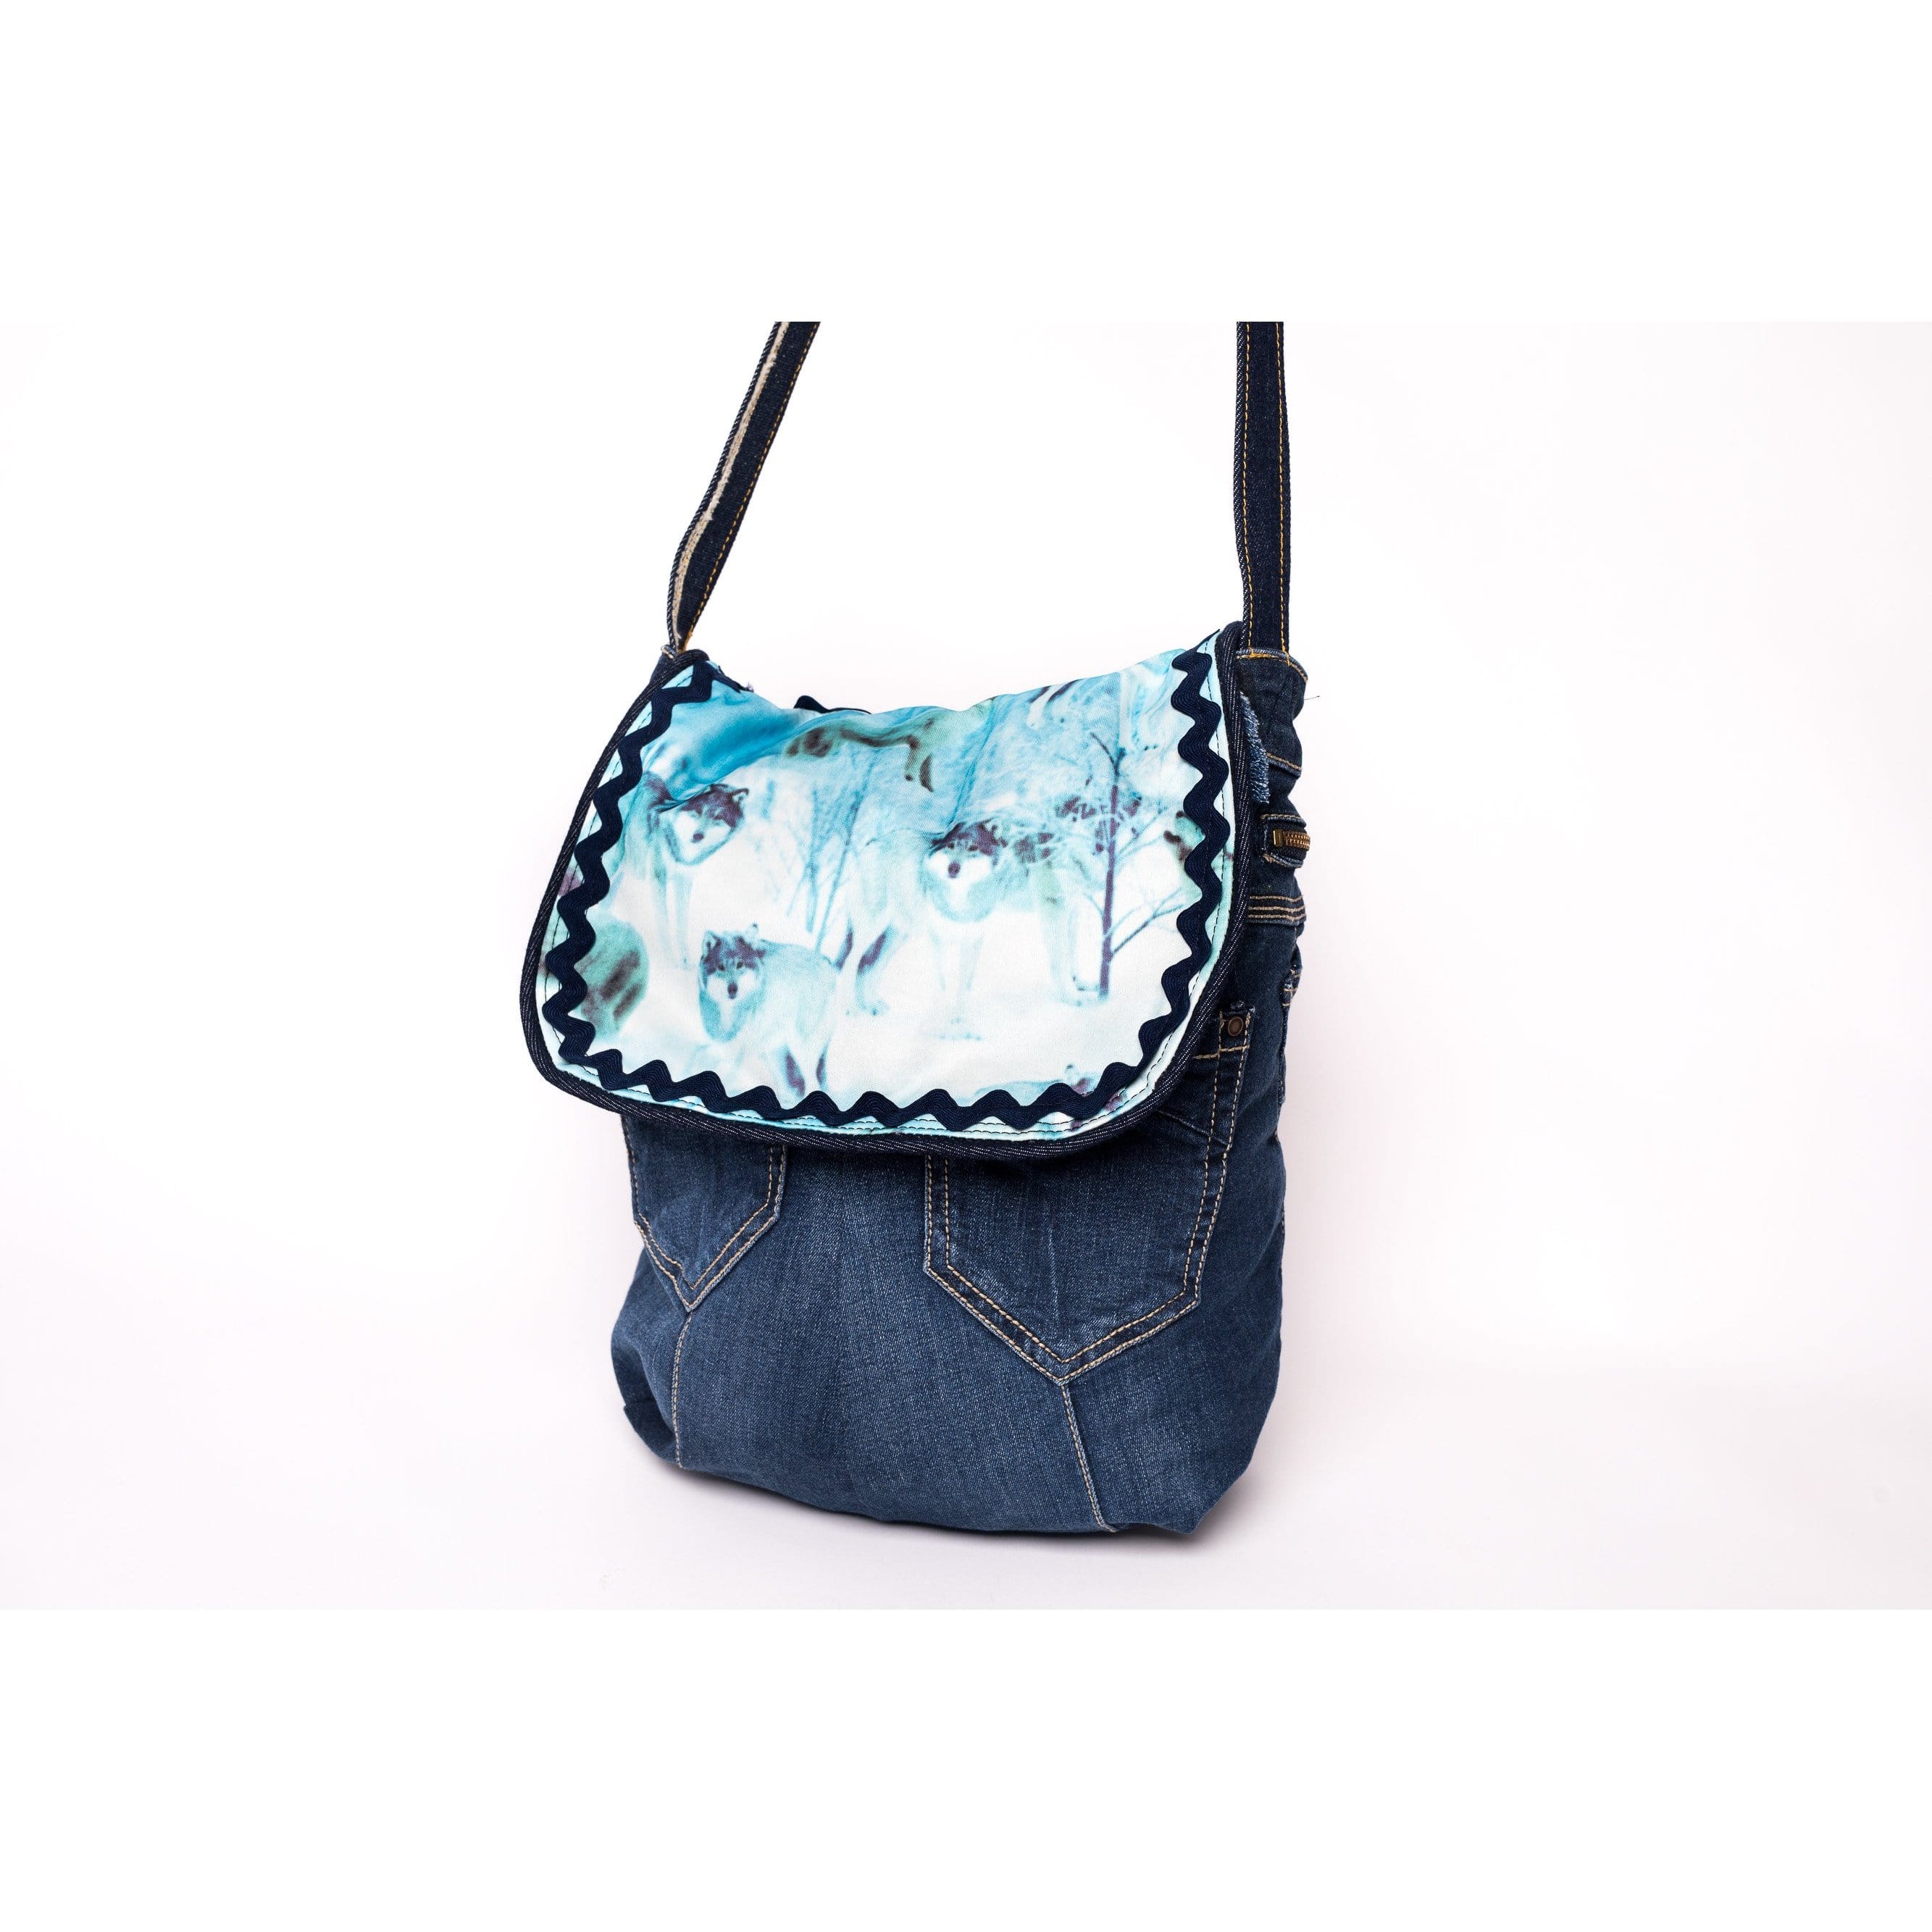 Up-Styled Denim Bags + Online women’s store